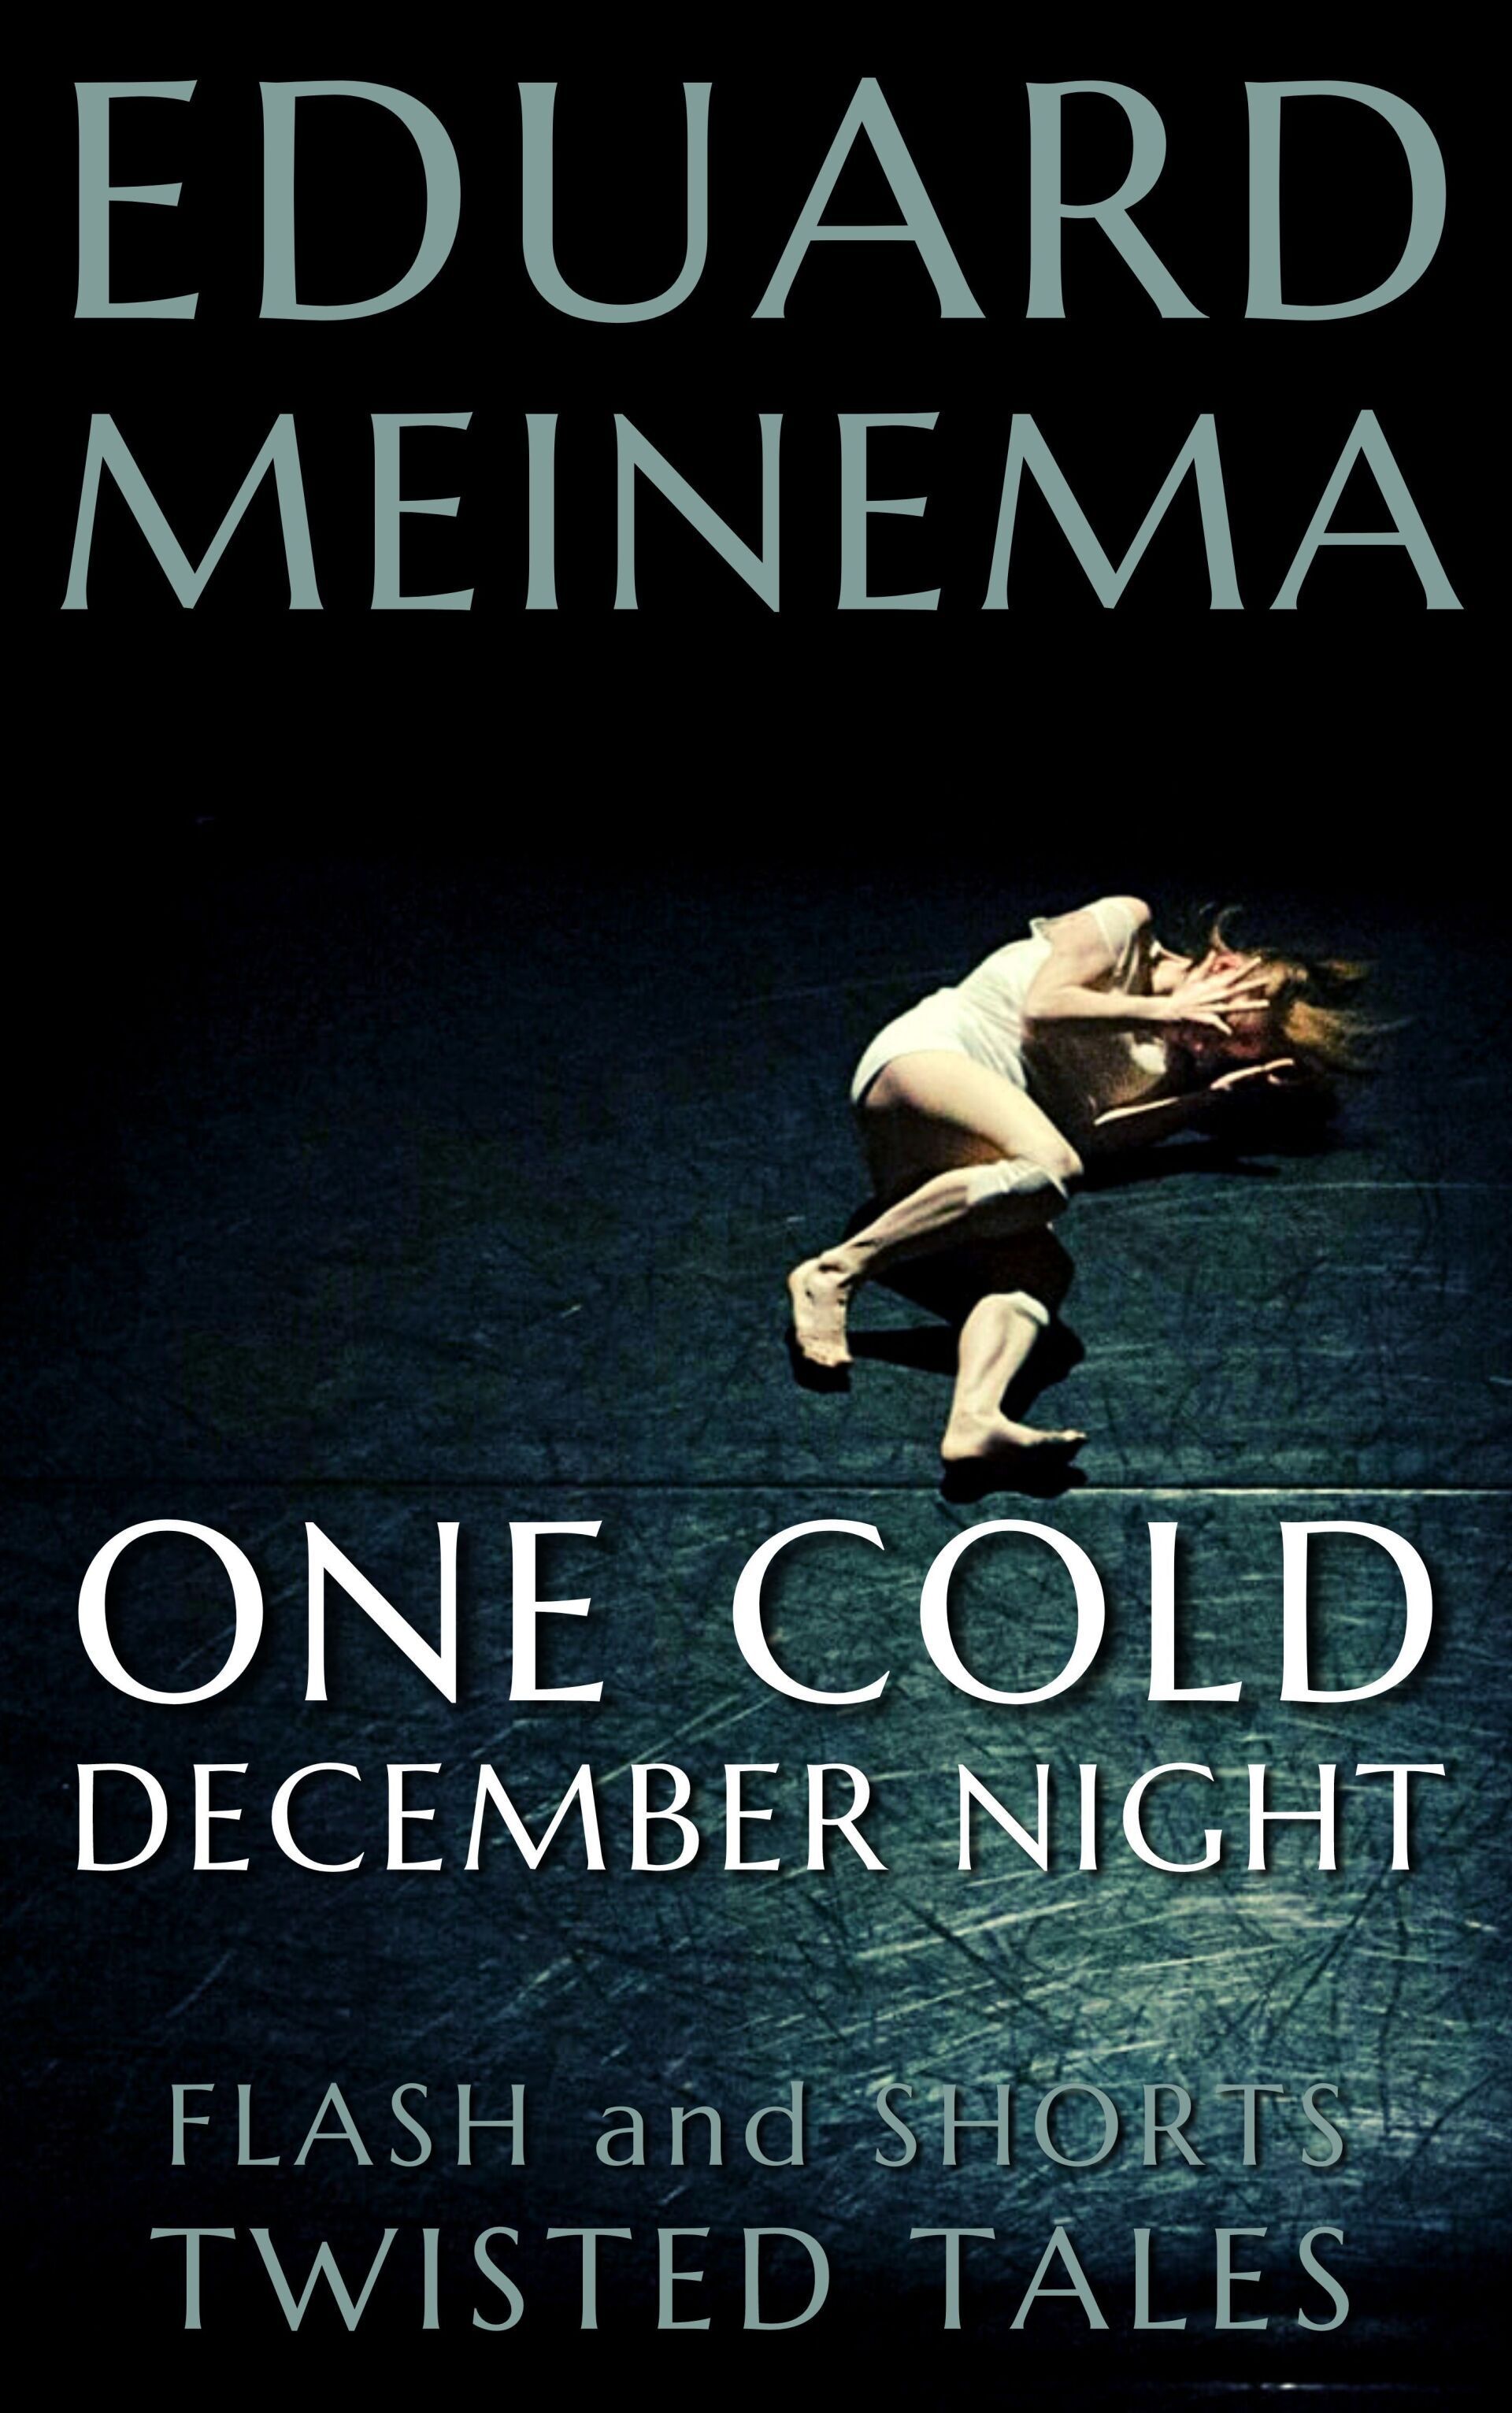 One Cold December Night. A short story by Eduard Meinema